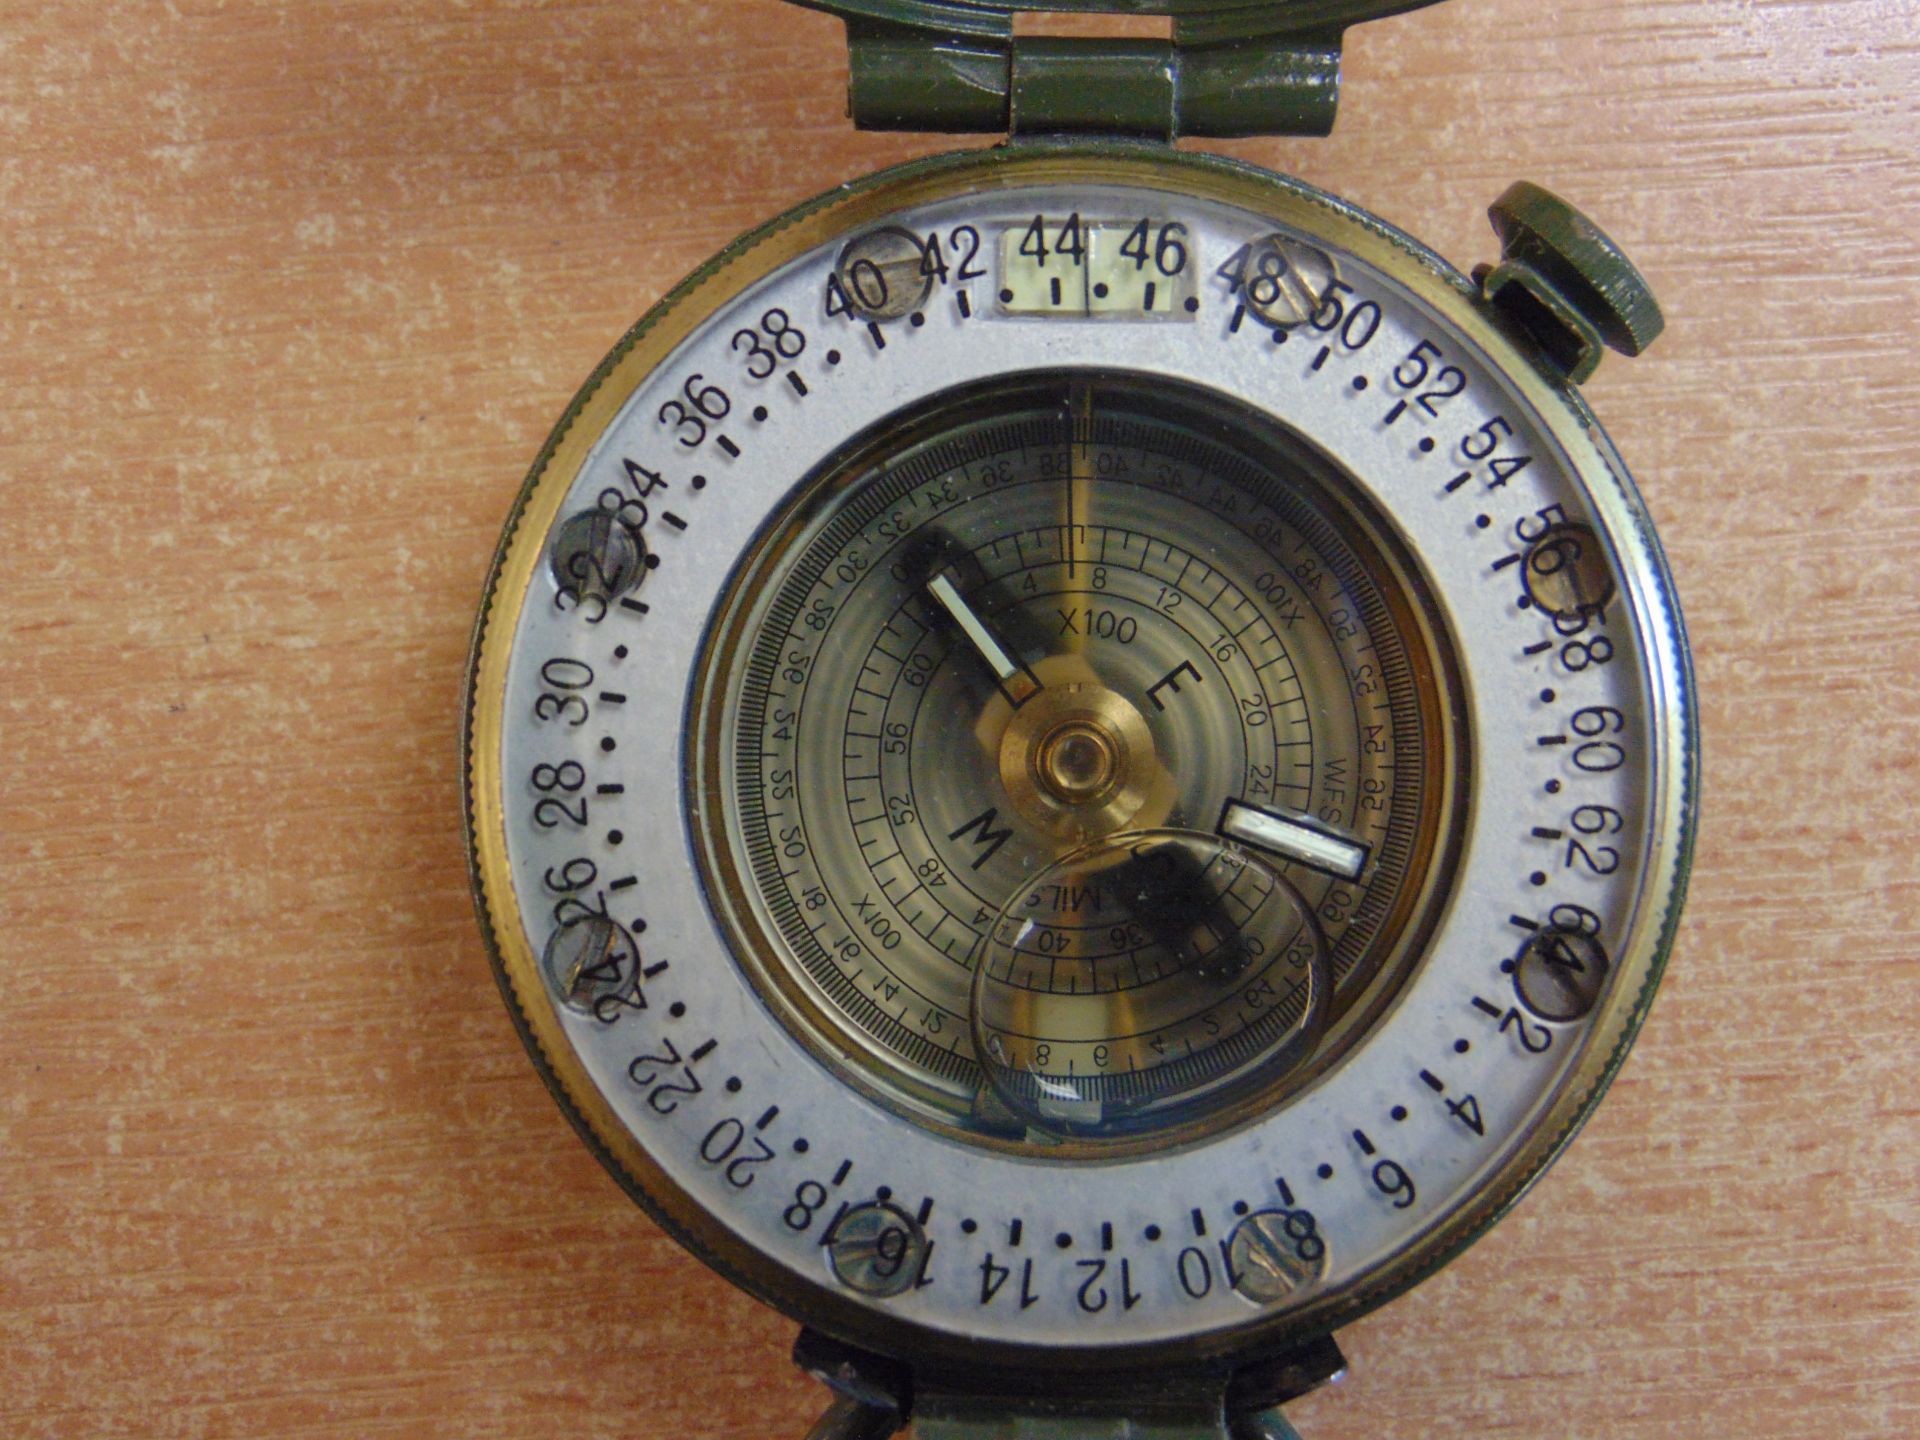 UNISSUED STANLEY LONDON PRISMATIC COMPASS NATO MARKED BRITISH ARMY - Image 3 of 7